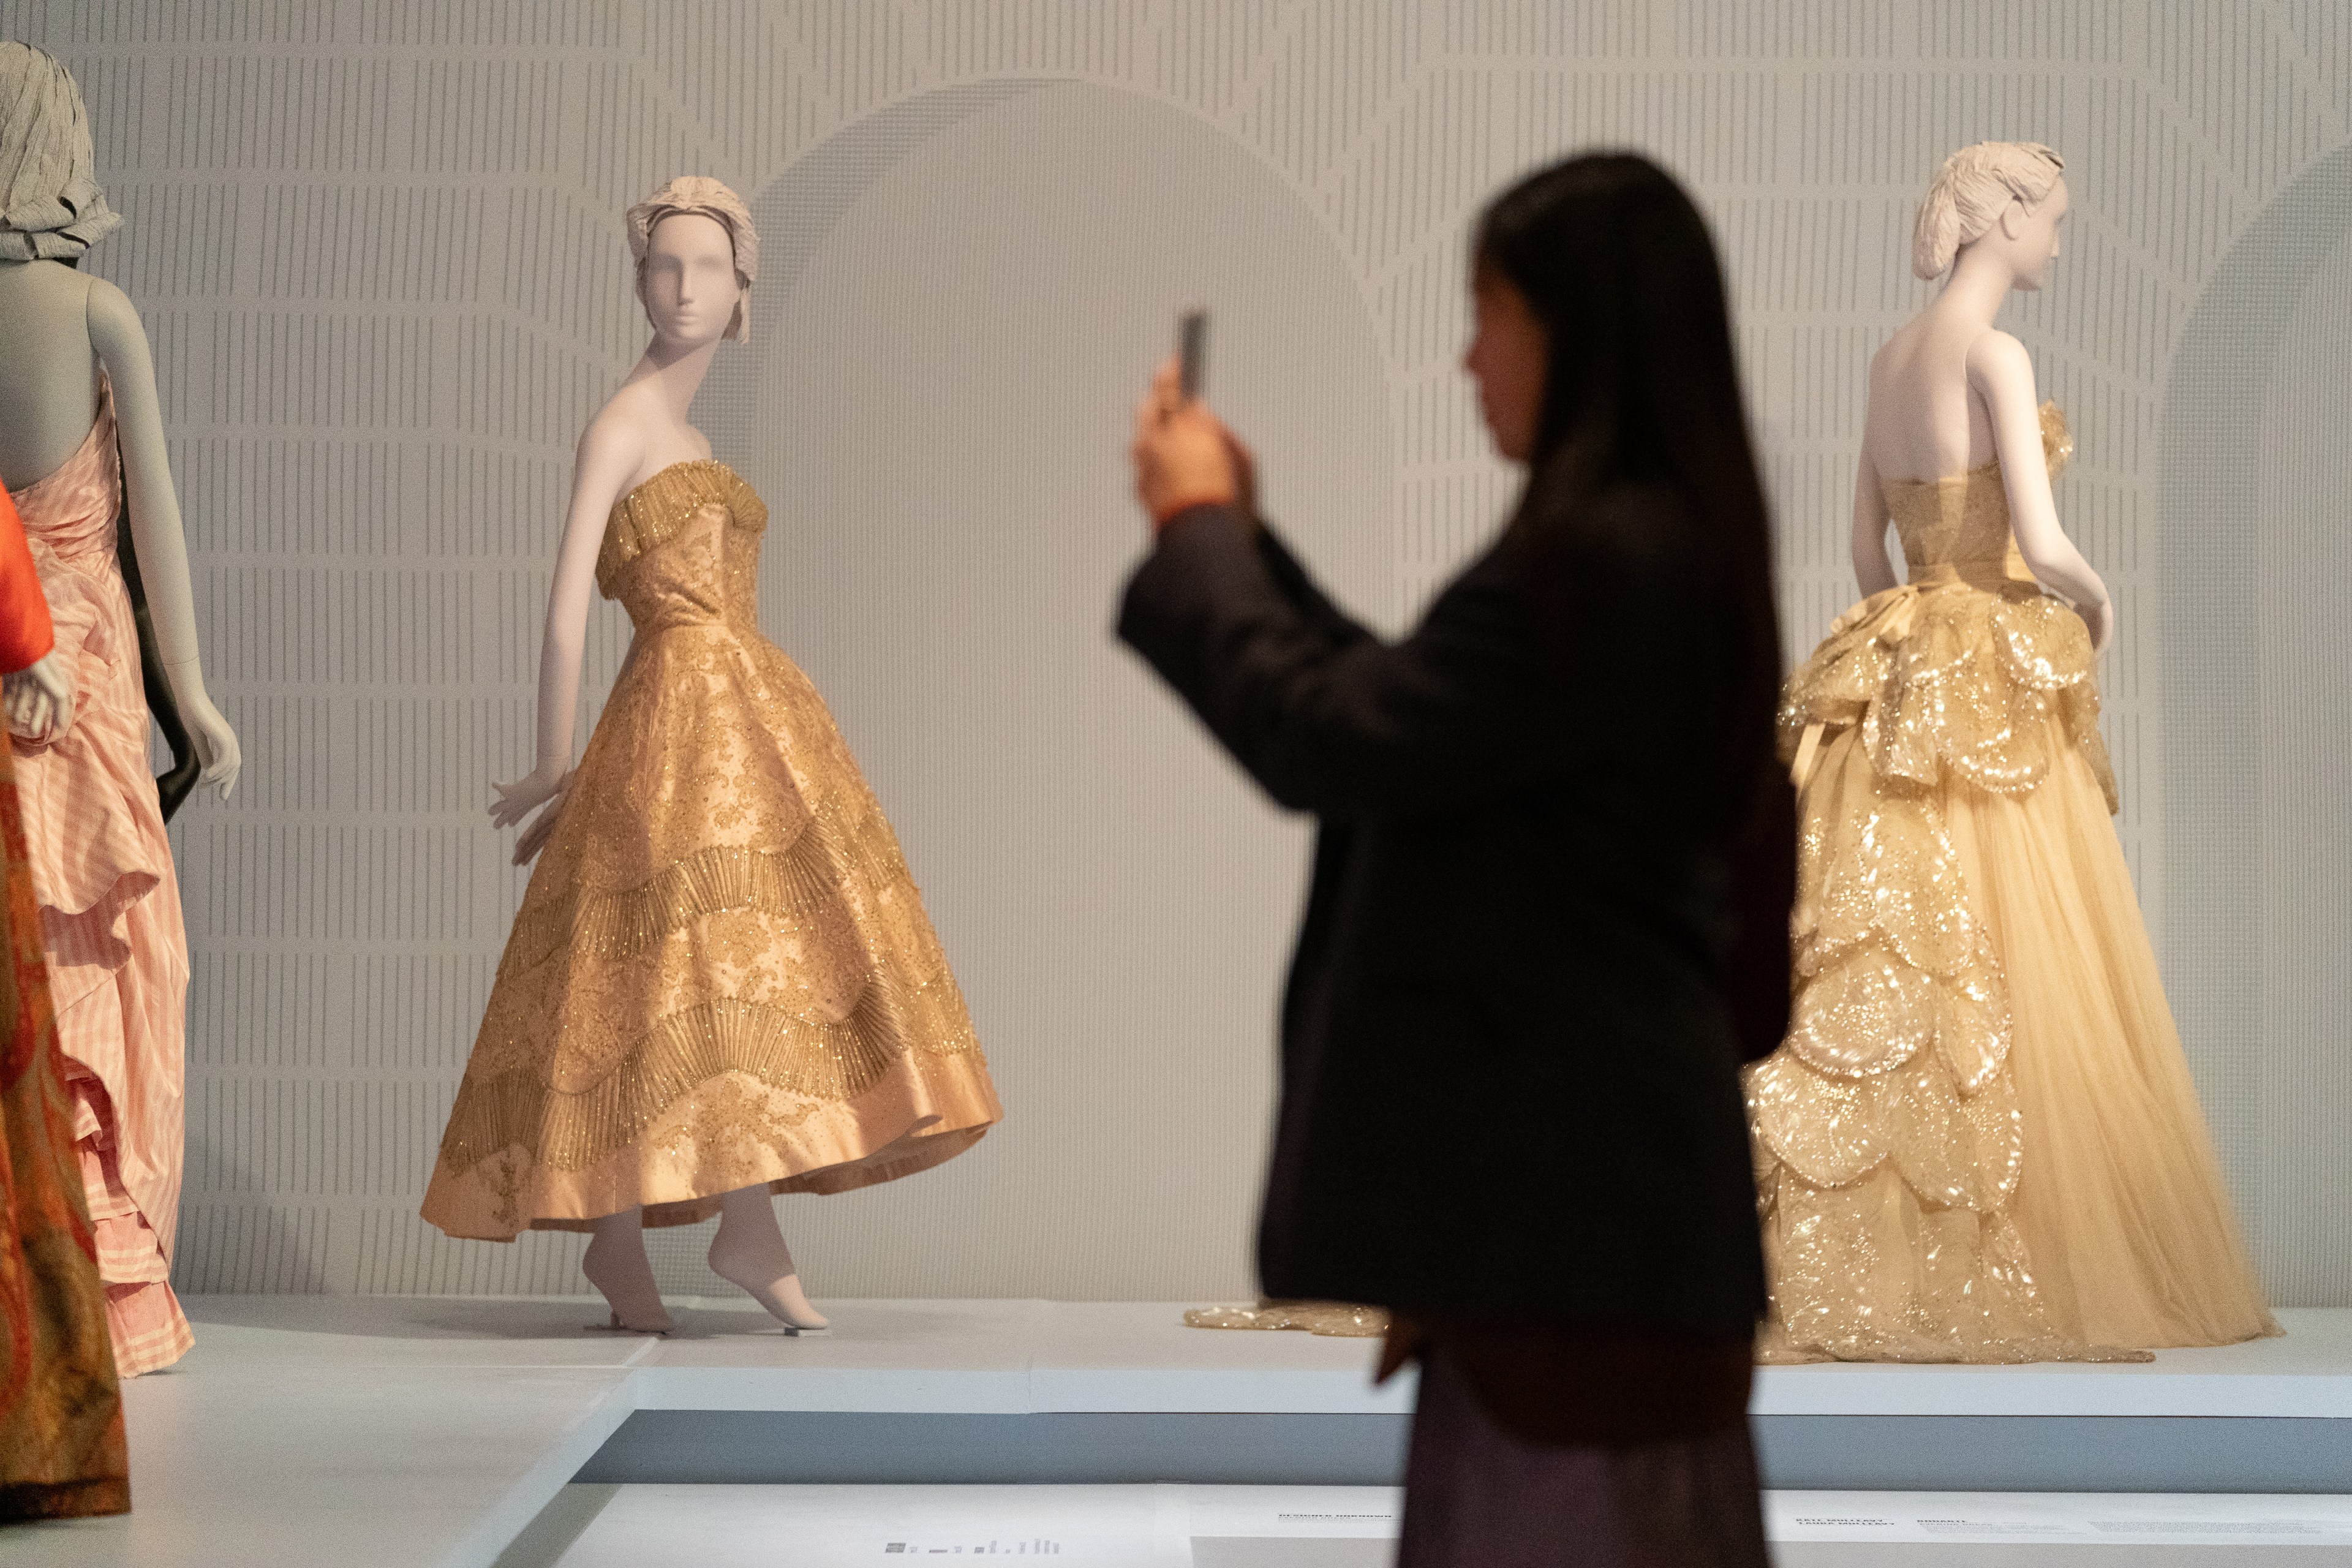 A person in all black takes a photo golden gowns on display.